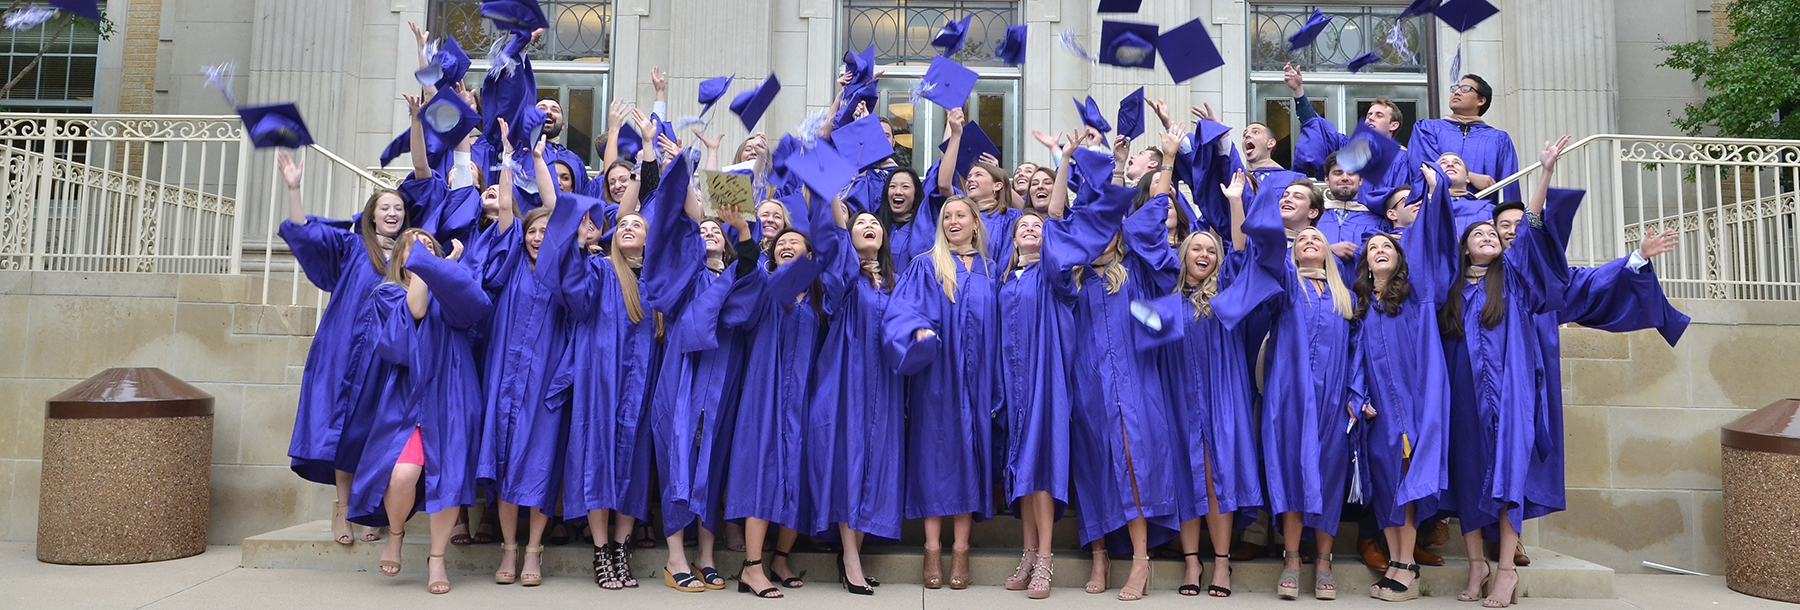 Section Image: Accounting grads 